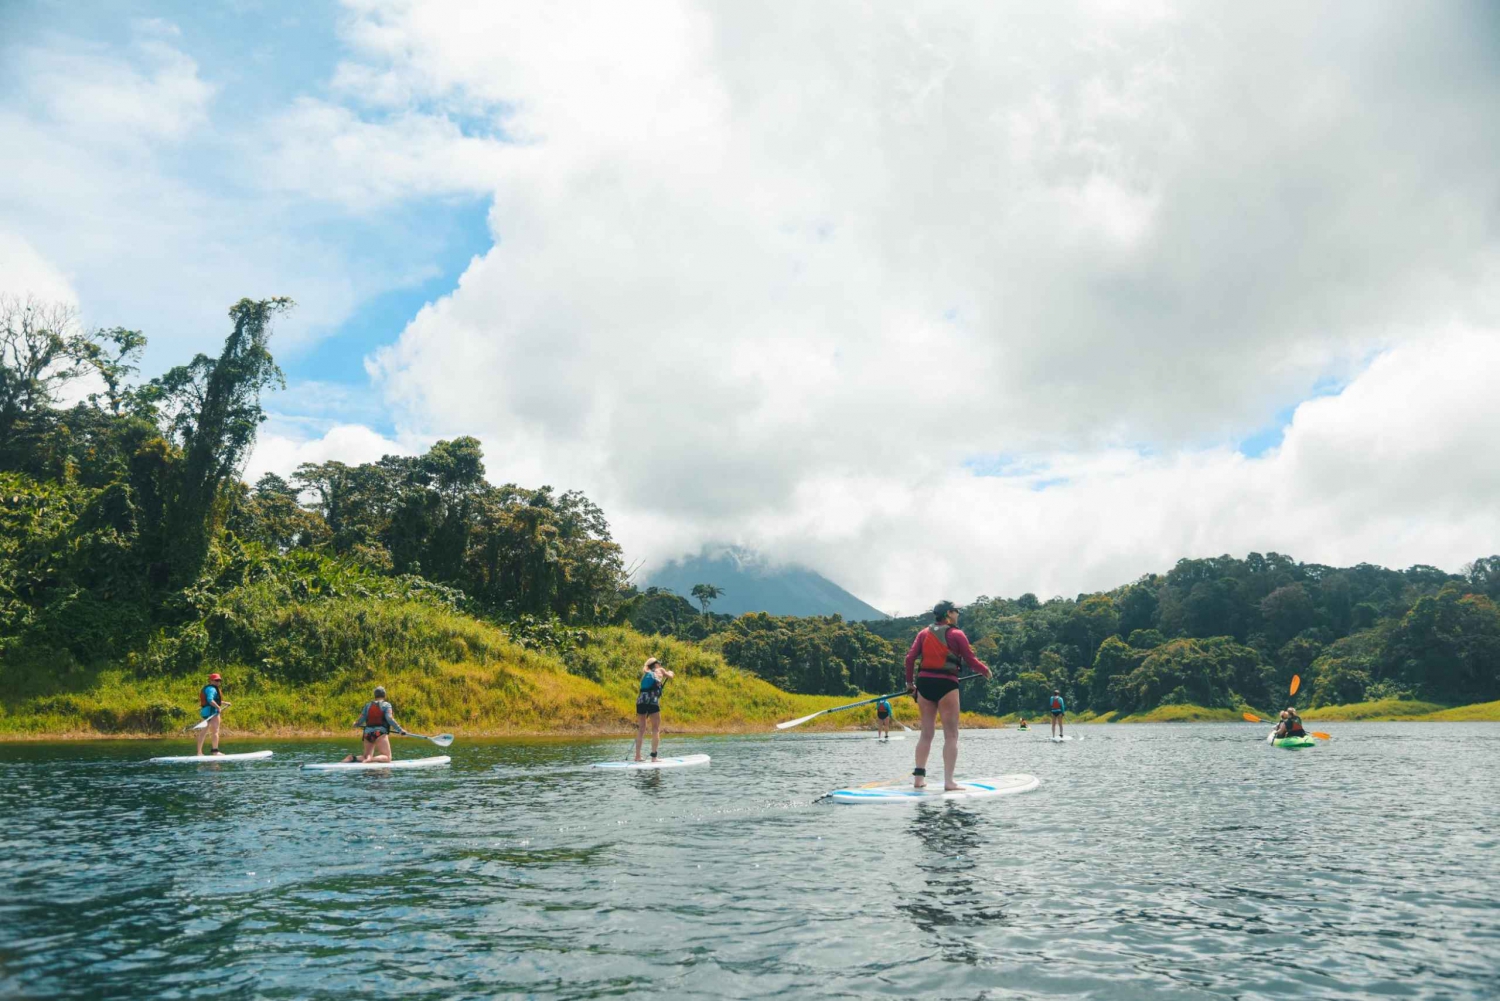 La Fortuna: Arenal Lake Stand-up Paddle Boarding